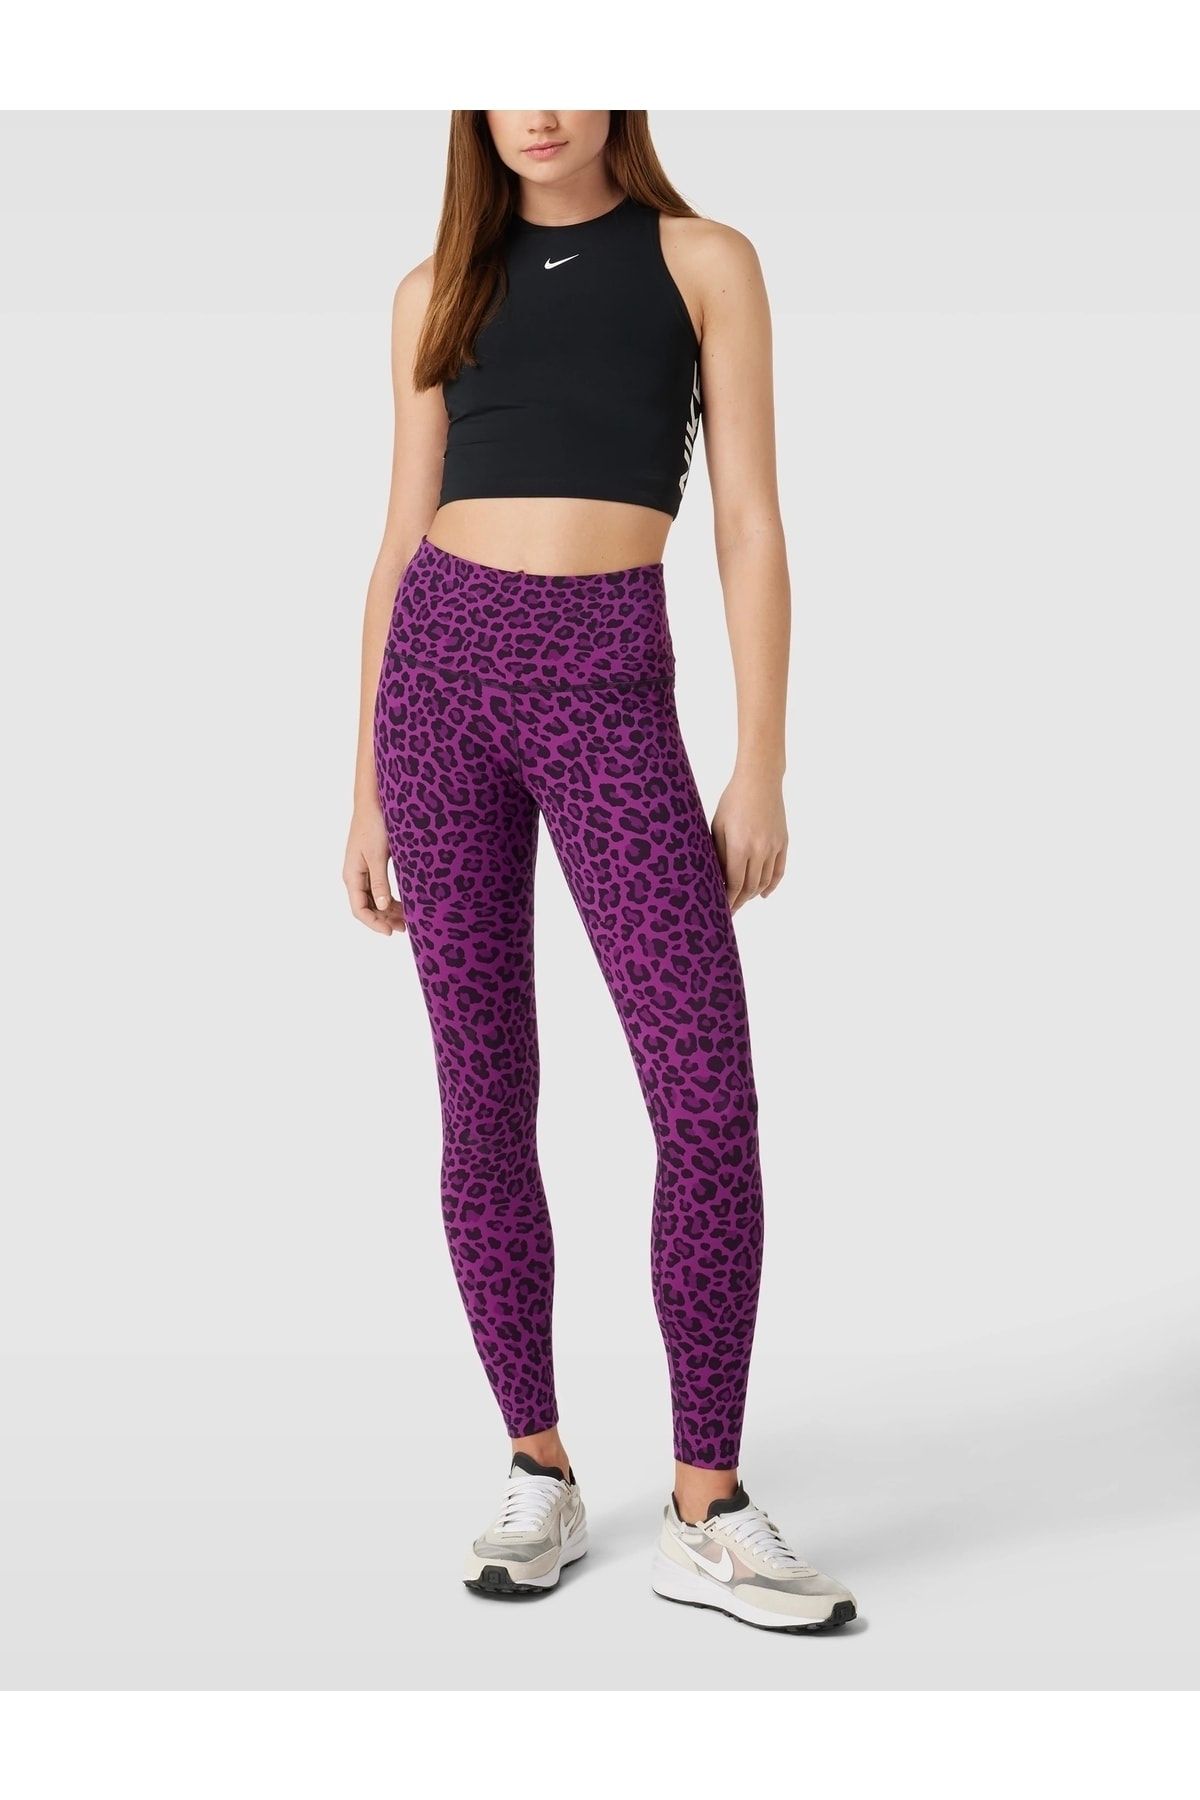 Nike One Luxe Women's Mid-Rise Printed Tights - Trendyol